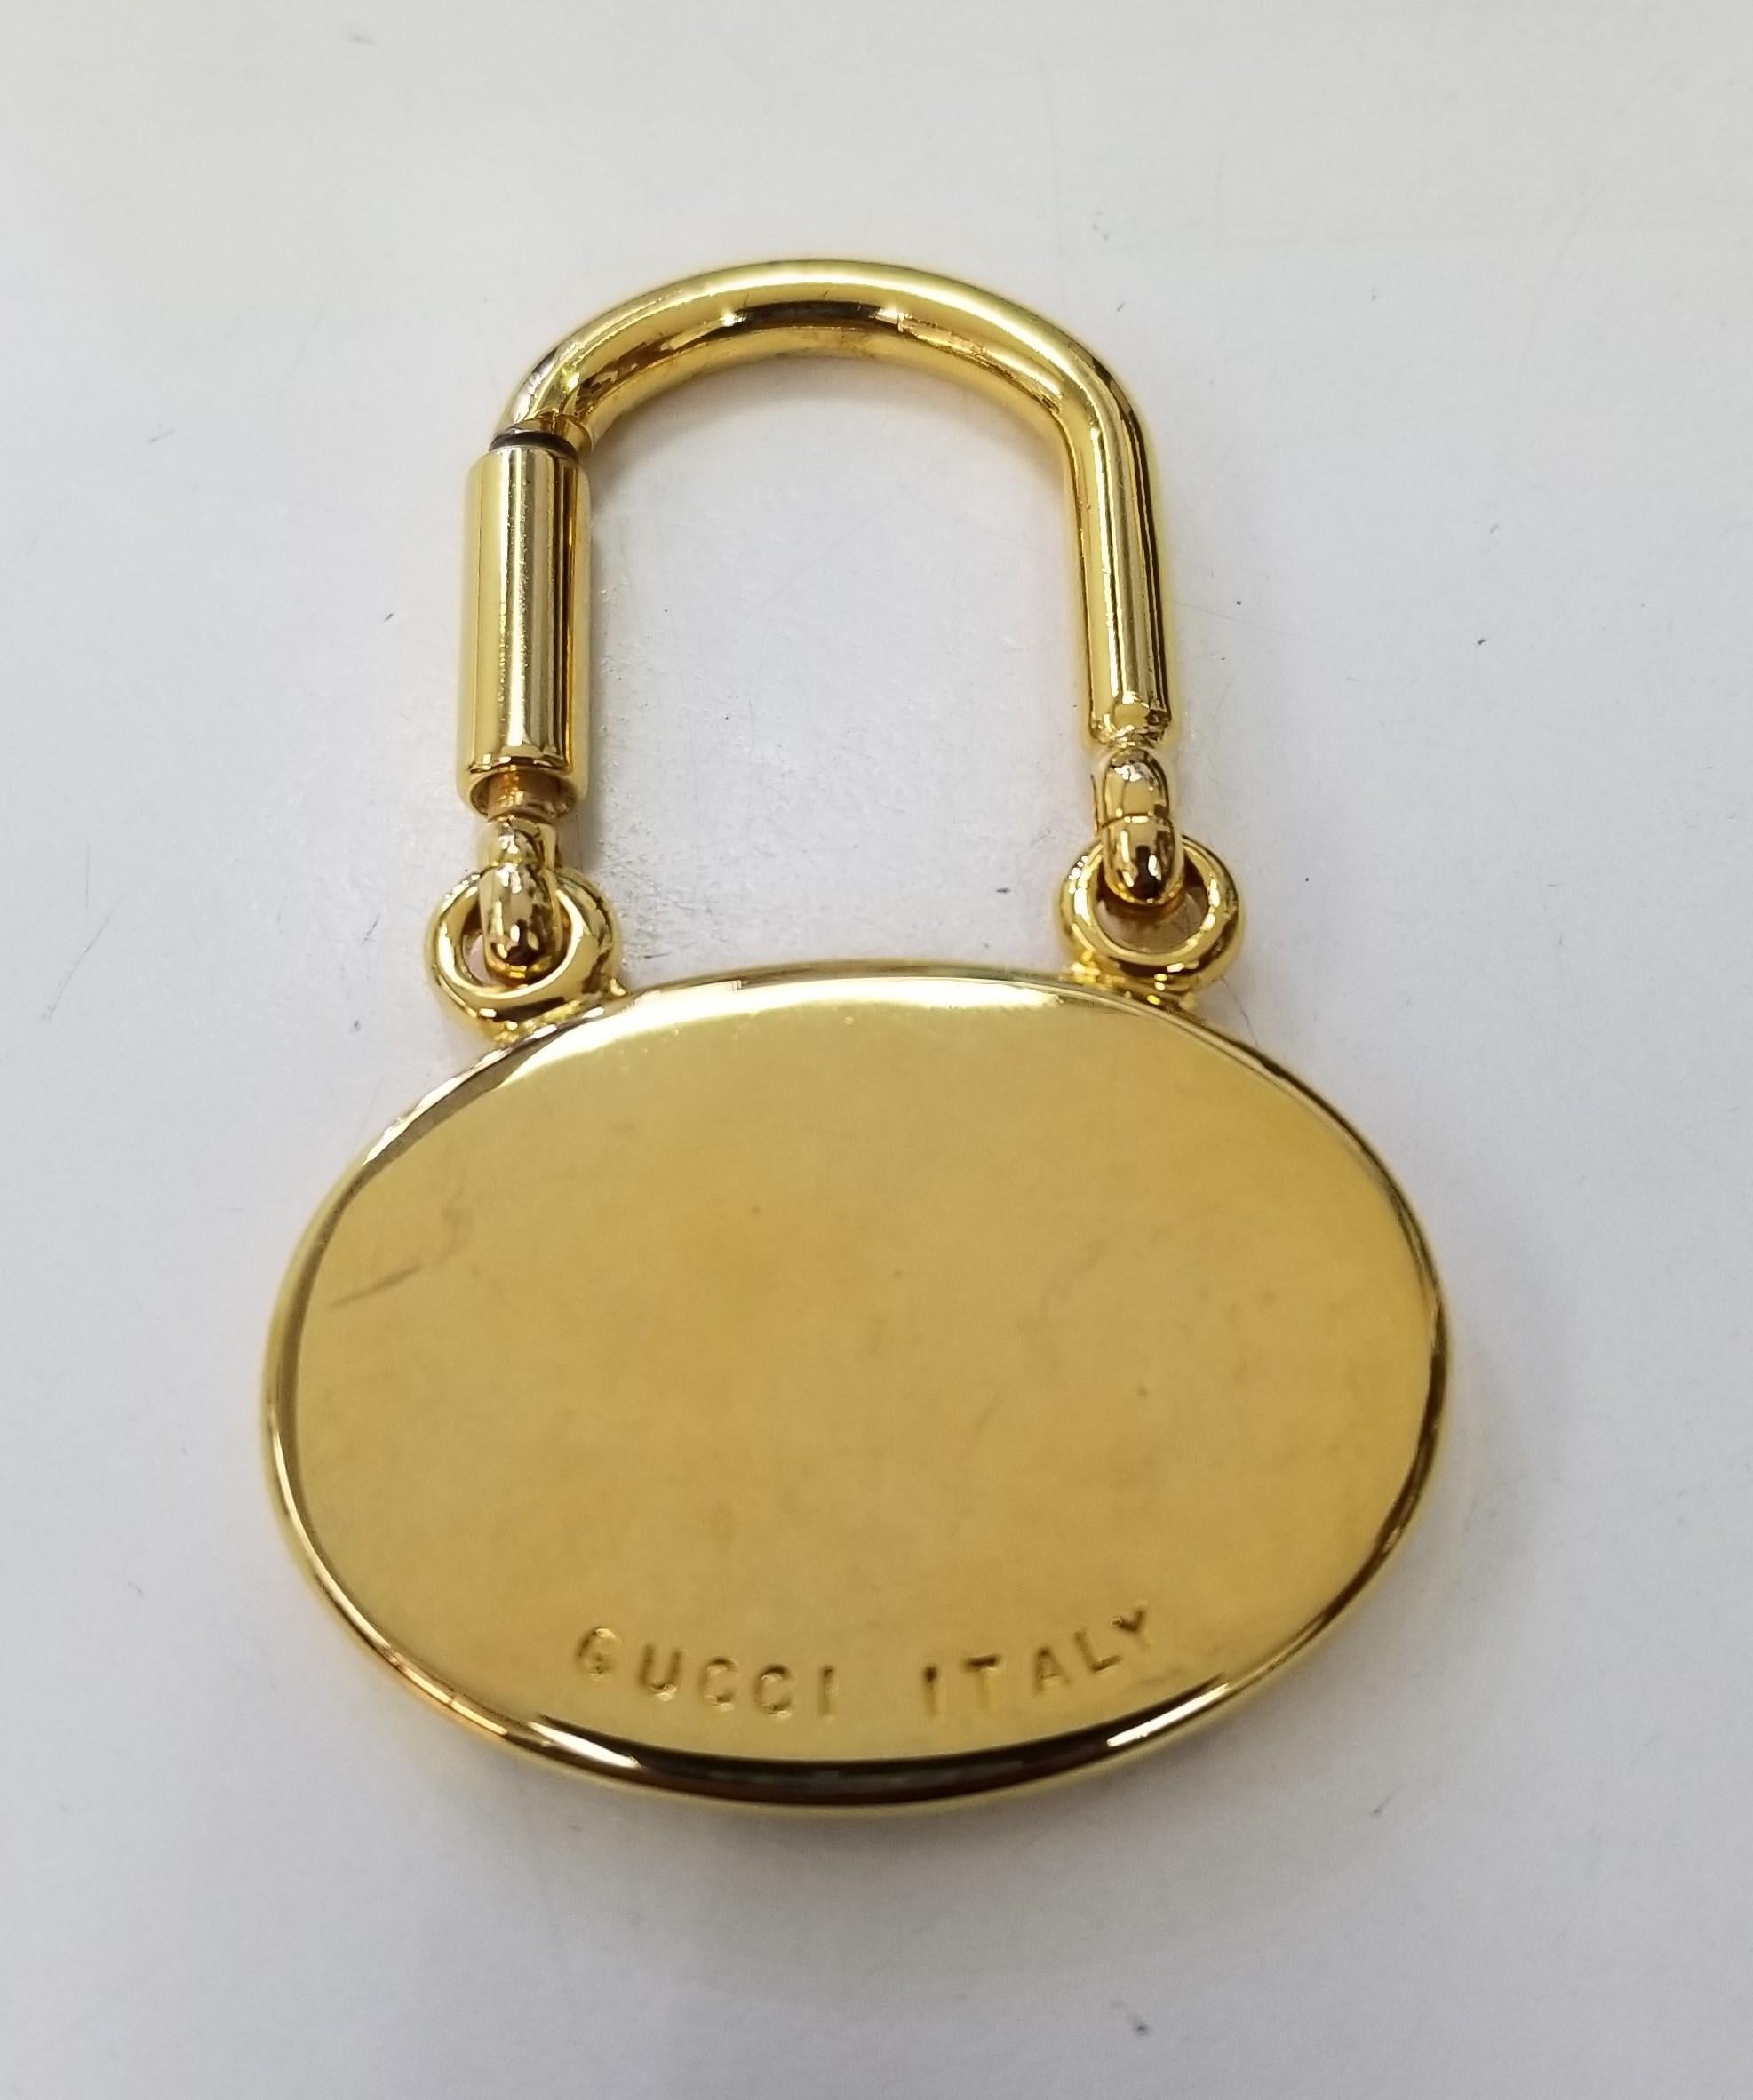 Product information
[Items] key chain
[Type] brand accessories
[Brand] Gucci (GUCCI)
[Line] key ring
[Series] Vintage
[Target] Unisex
[Material] Metal
[Color] Gold/Silver
[Country of origin] Italy
*Never Used*


